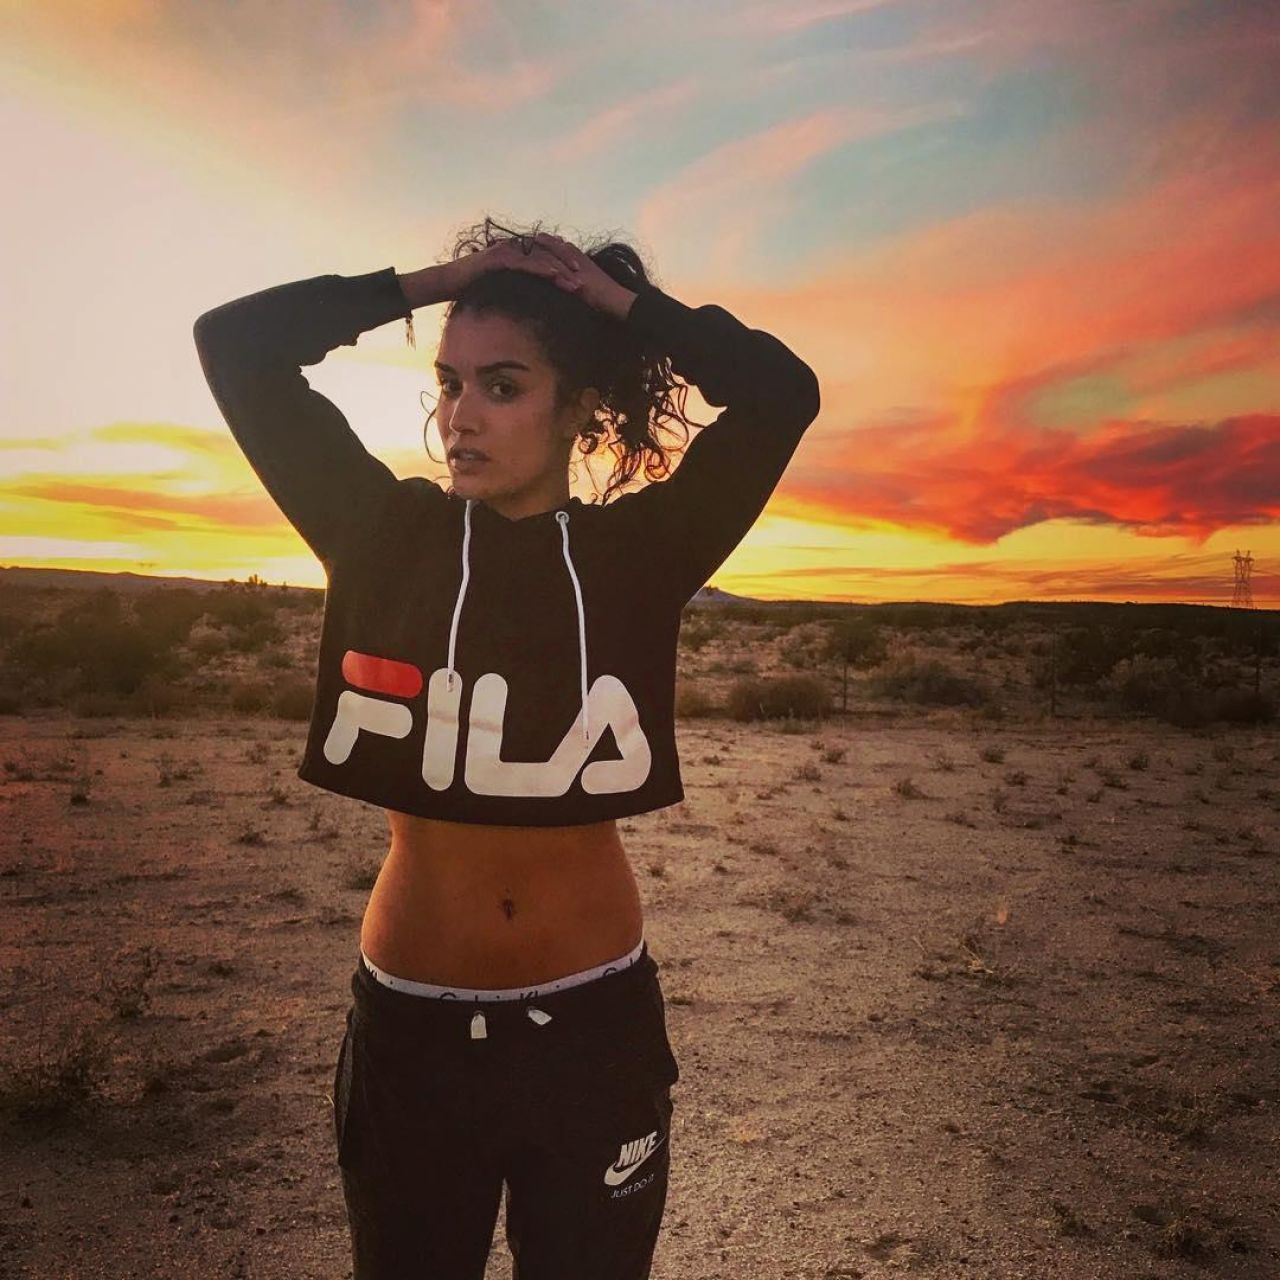 The Pants Nike Sportswear Gym Vintage Sabrina Ouazani on the account instag...